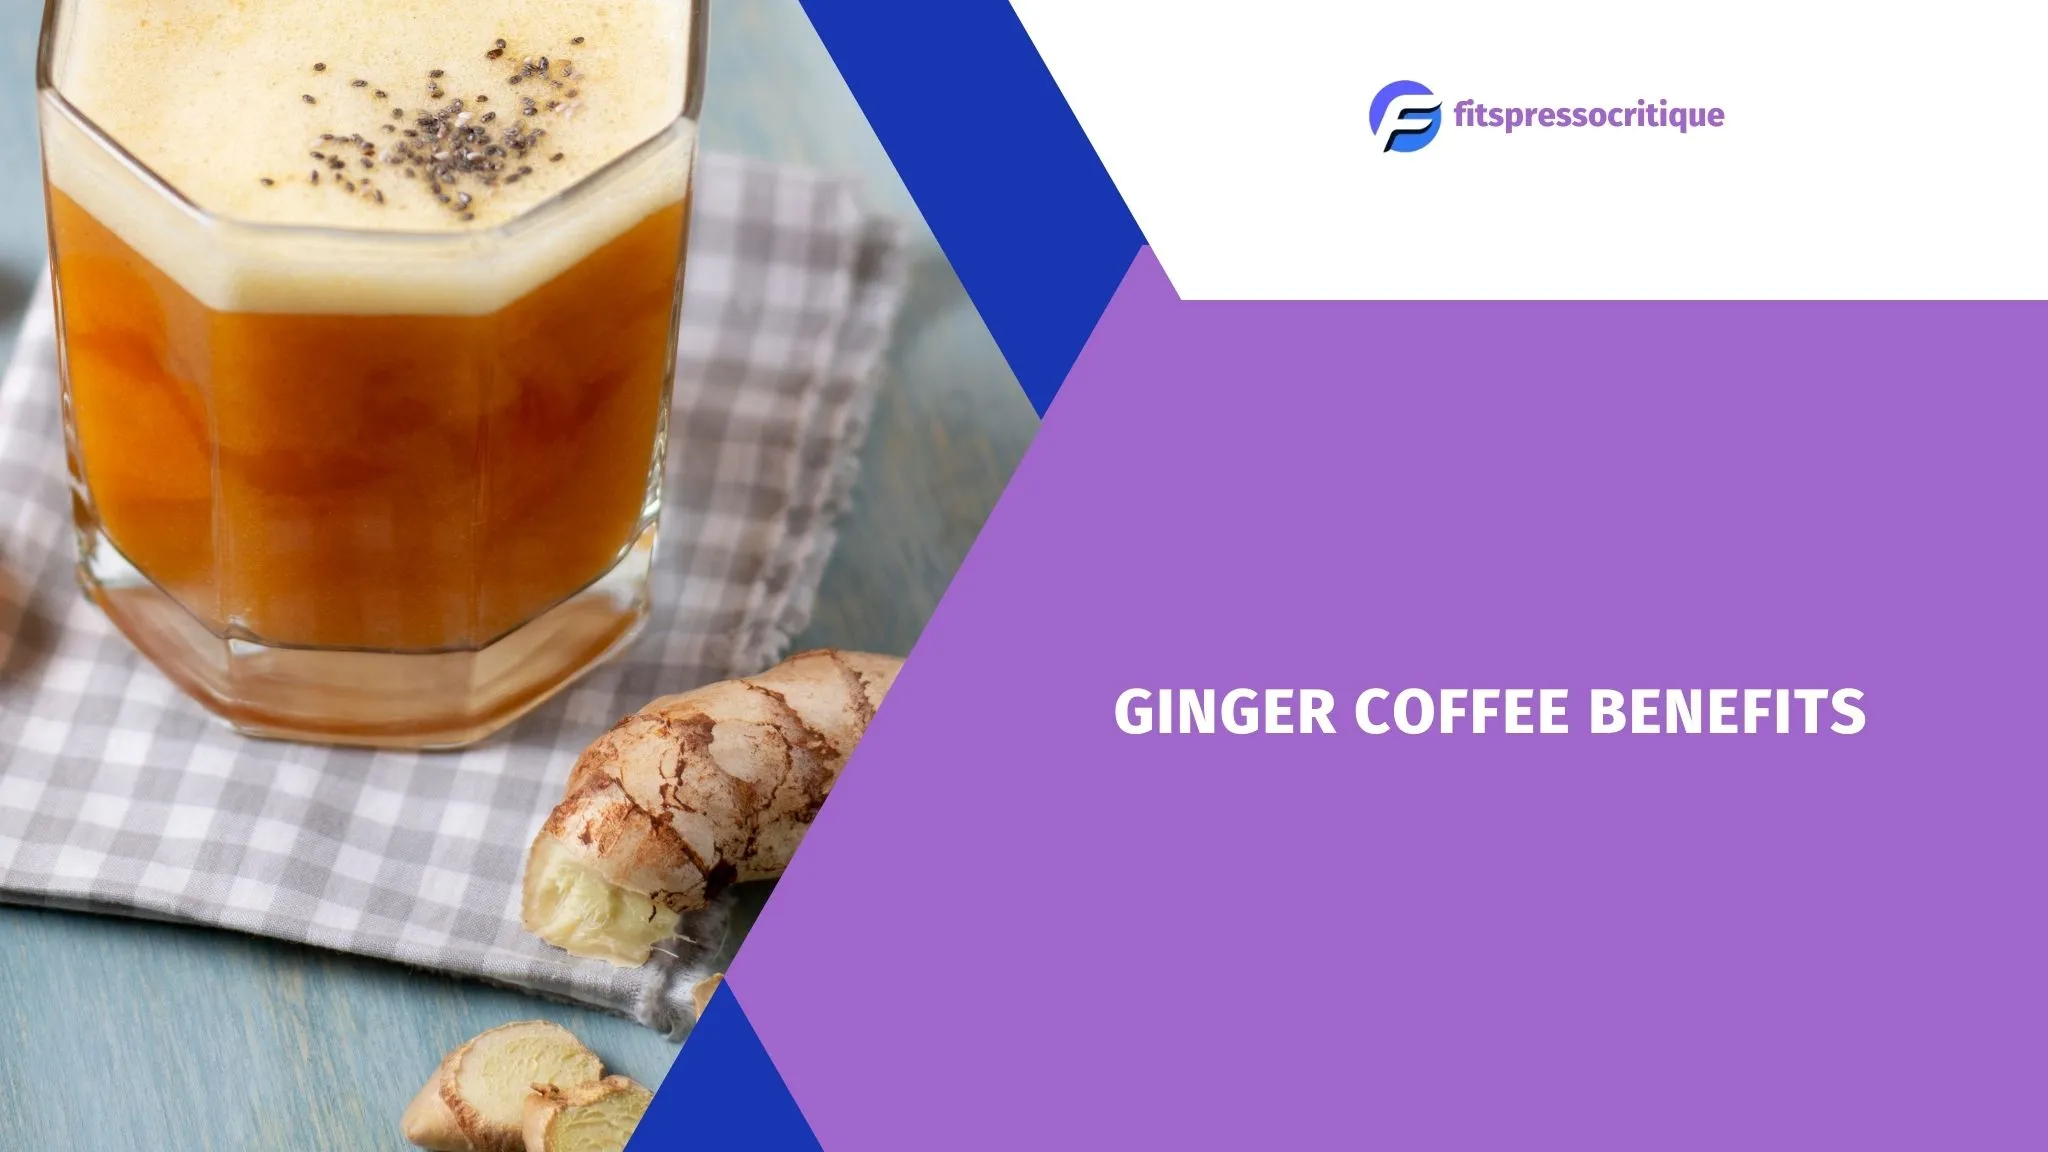 Ginger Coffee benefits